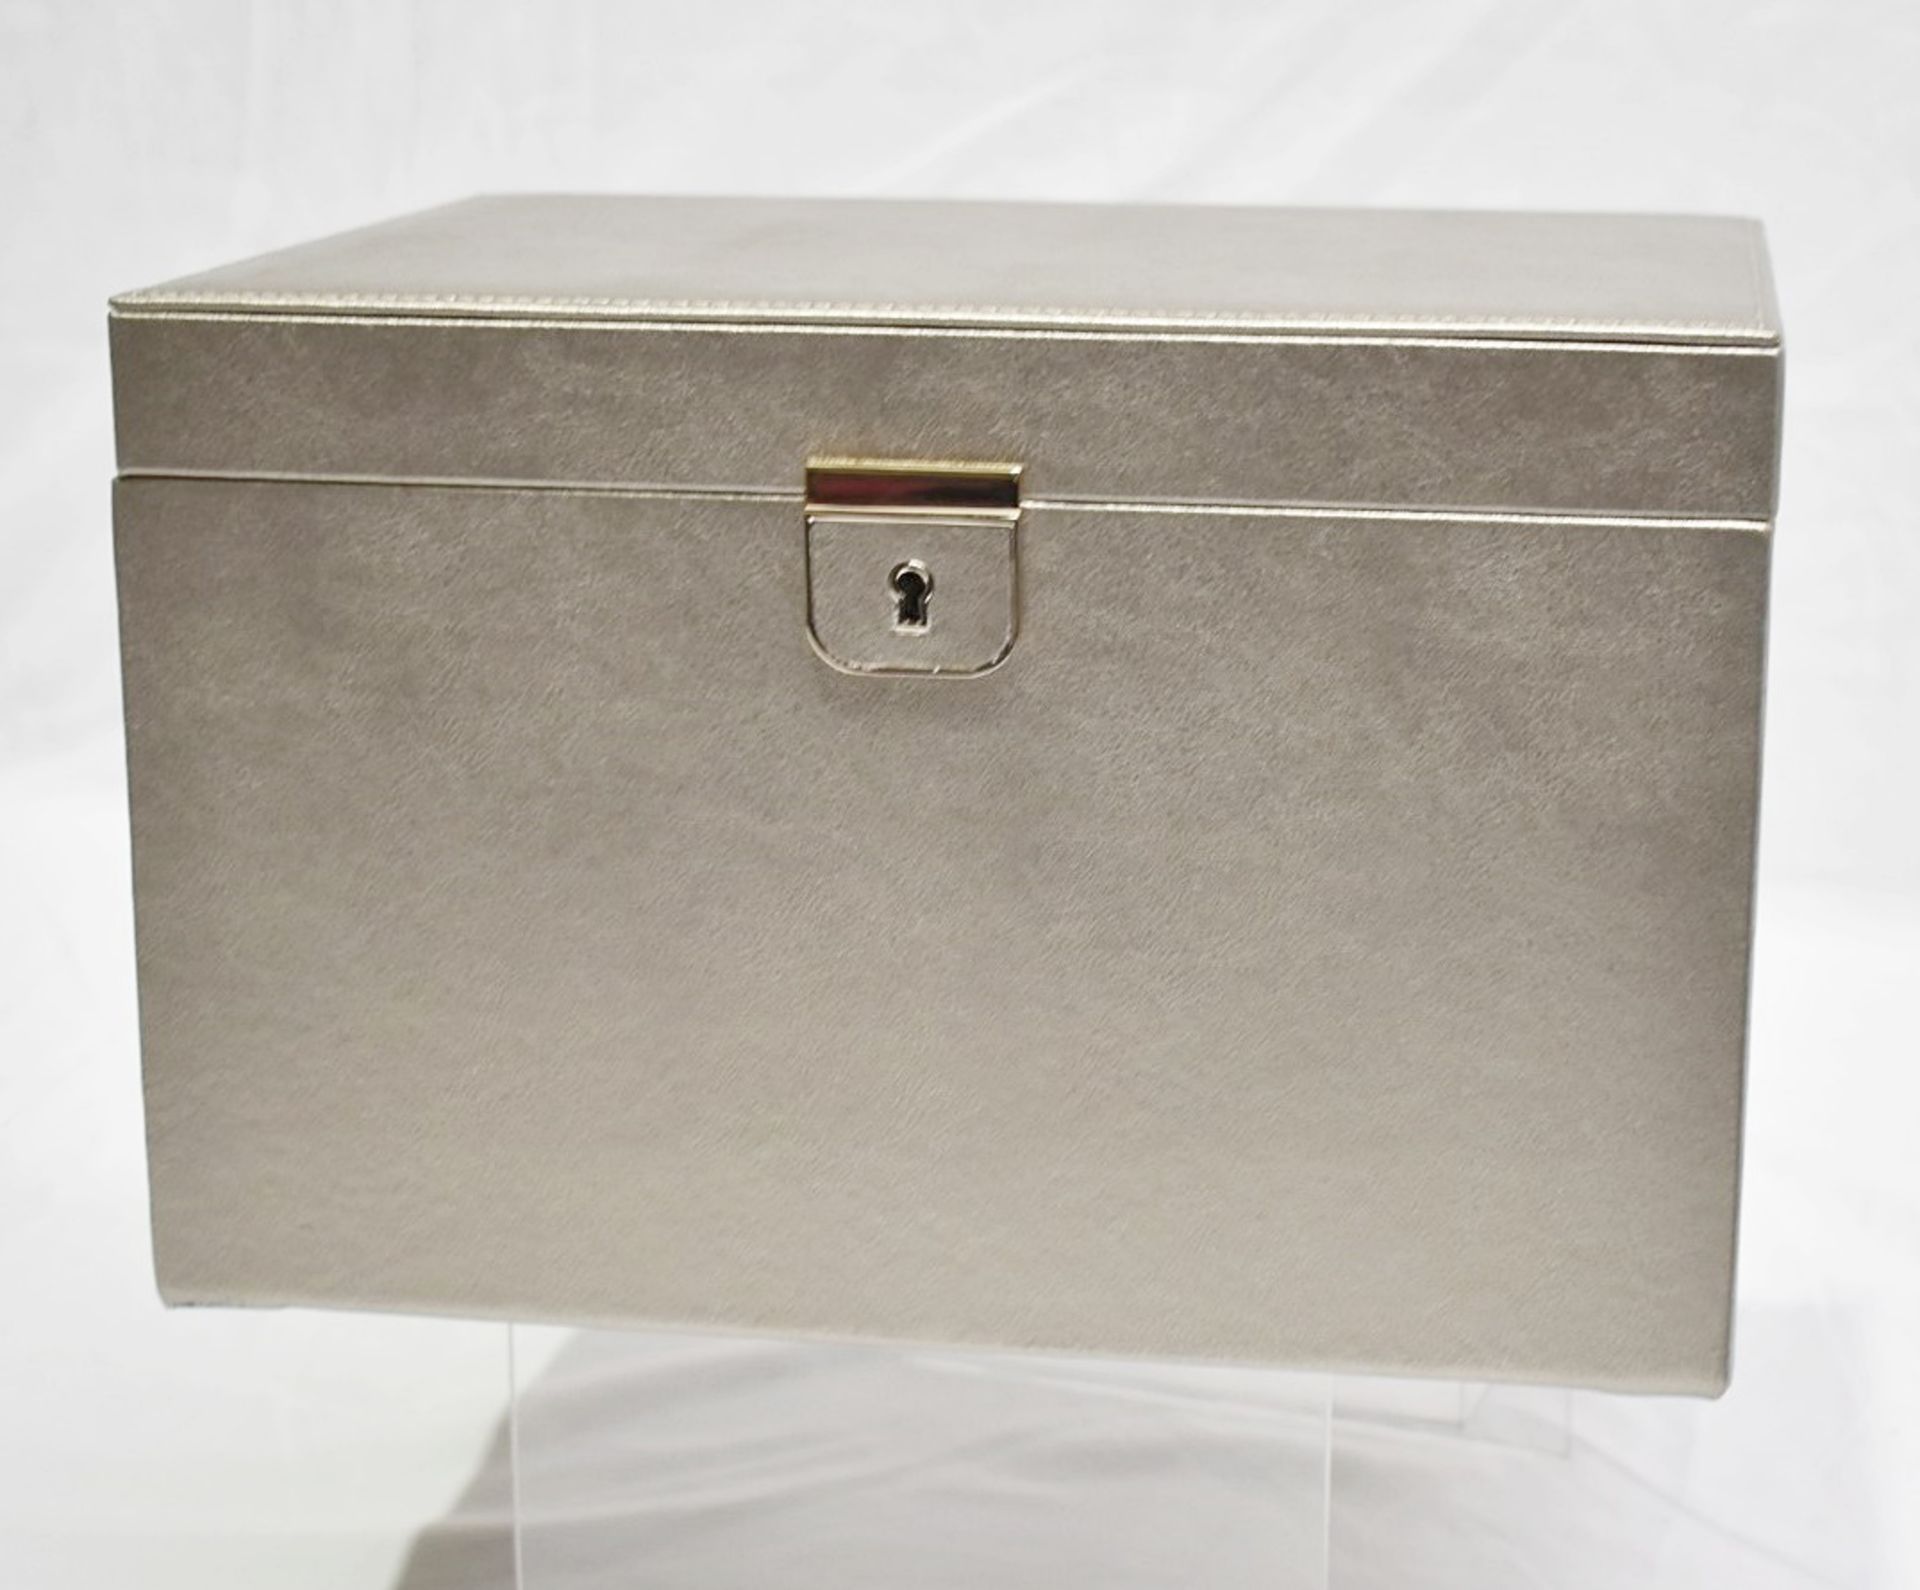 1 x WOLF 'Palermo' Large Luxury Leather Jewellery Box, With A Pewter Finish - Original Price £475.00 - Image 9 of 18